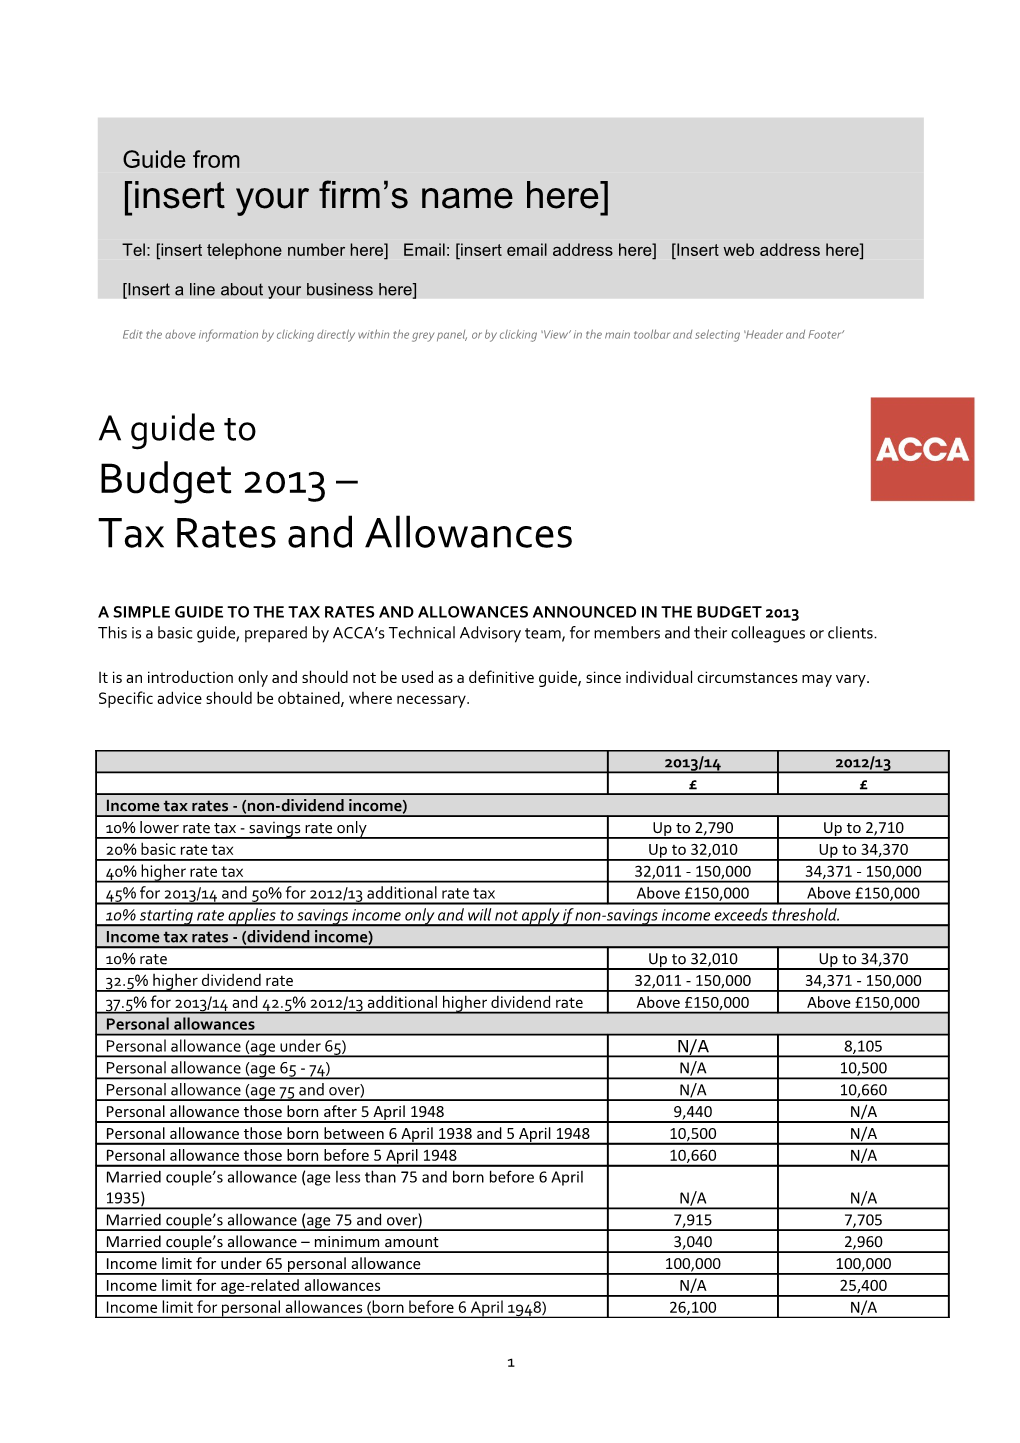 A Simple Guide to the Tax Rates and Allowances Announced in the Budget 2013